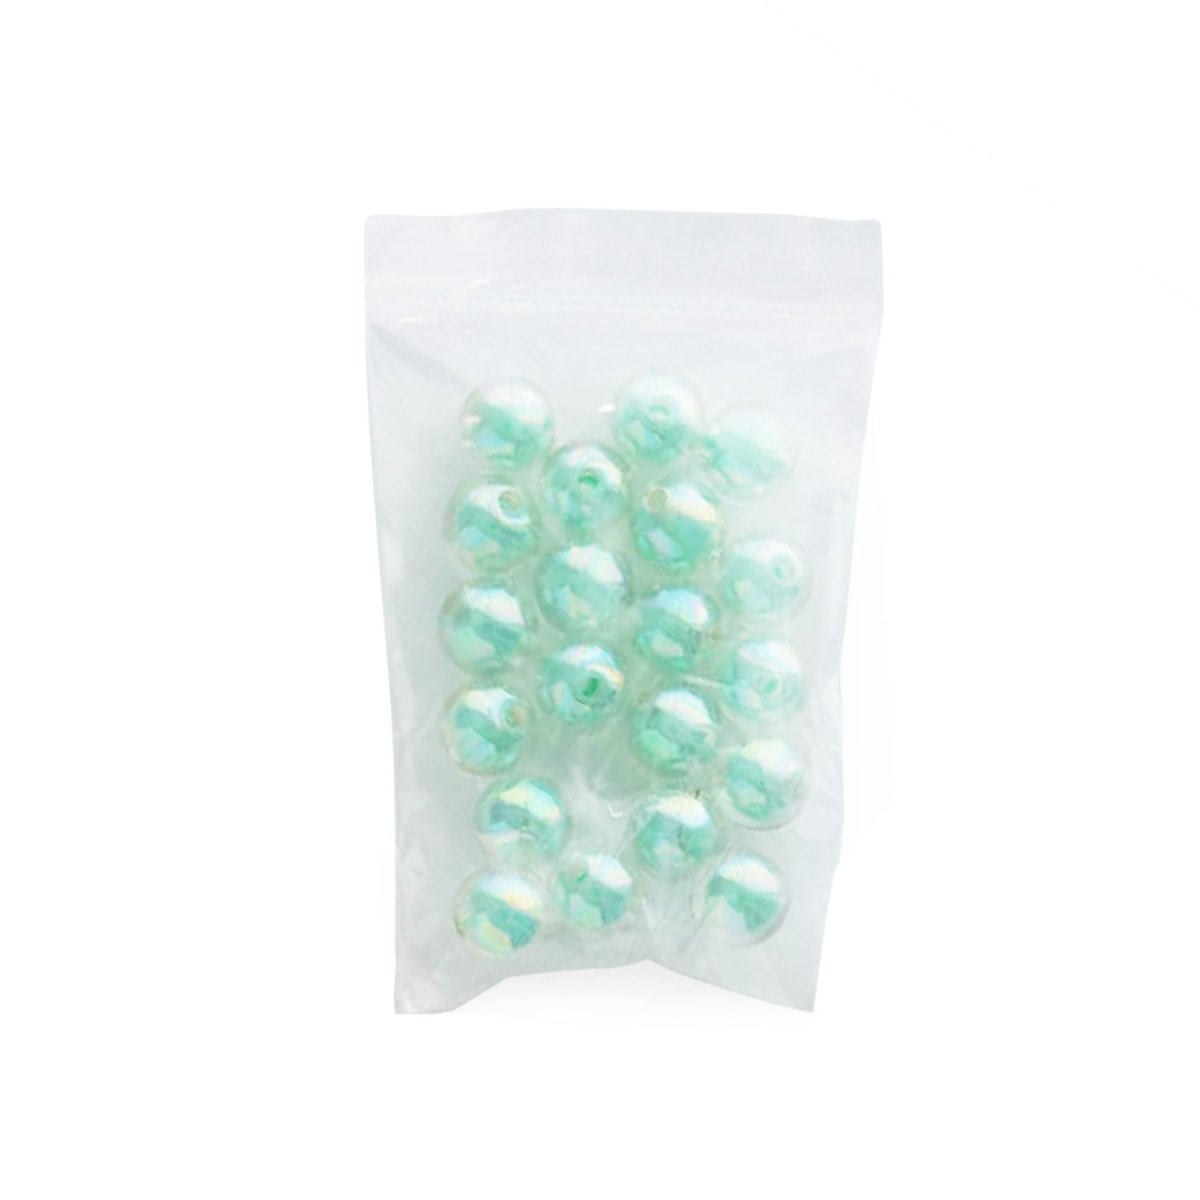 Acrylic Round Beads Double Bead 12mm Green AB from Cara & Co Craft Supply